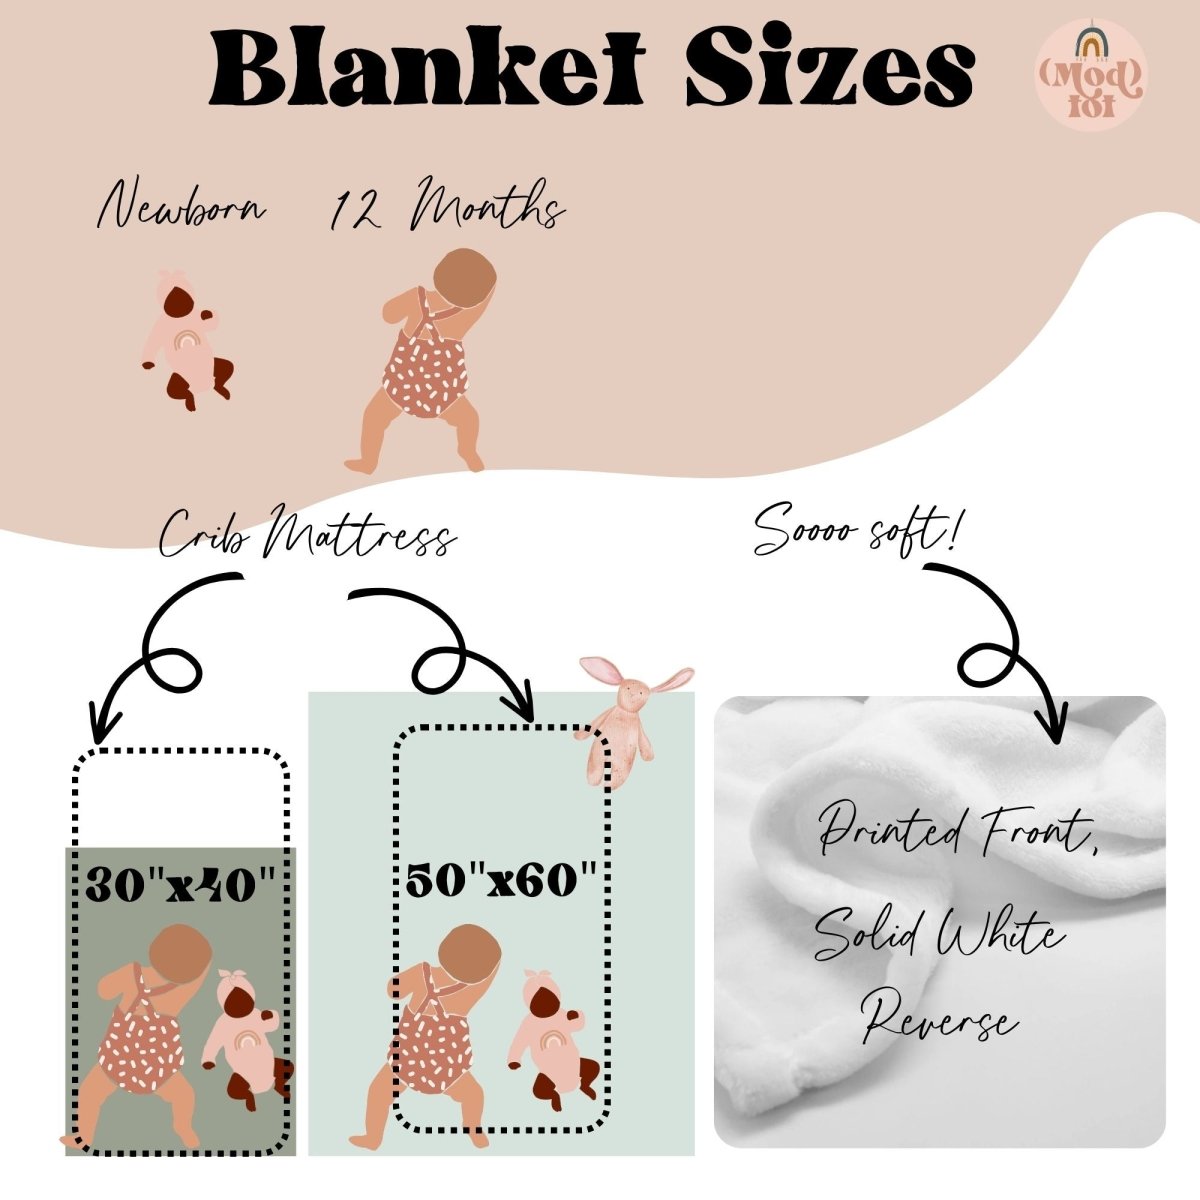 Farm Floral Calf Personalized Minky Blanket - Farm Floral, gender_girl, Personalized_Yes